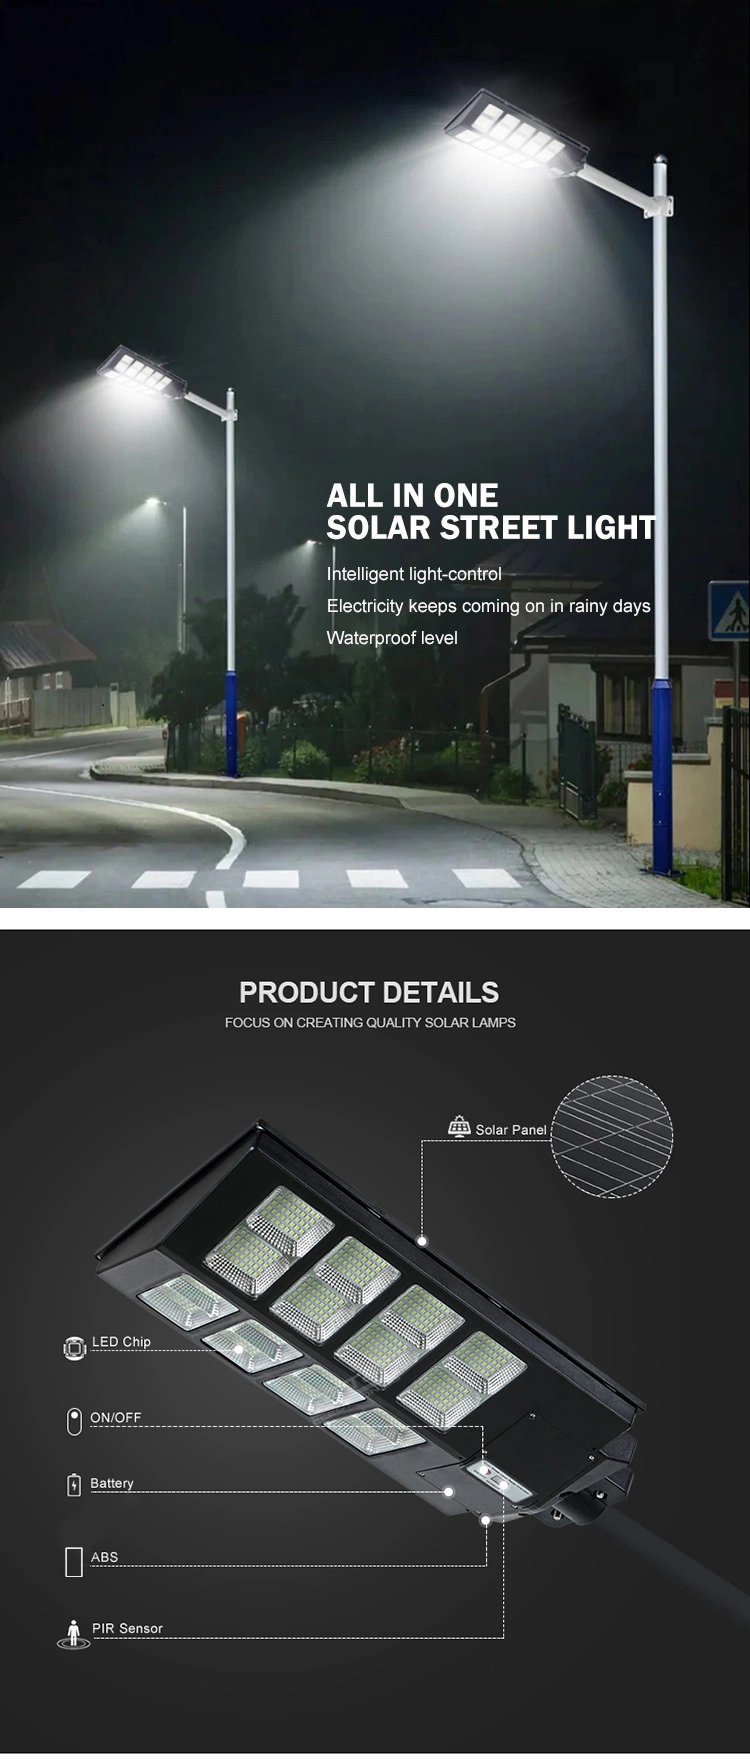 20-120W Wind Solar LED Power System Garden/Street Light with Factory-Price